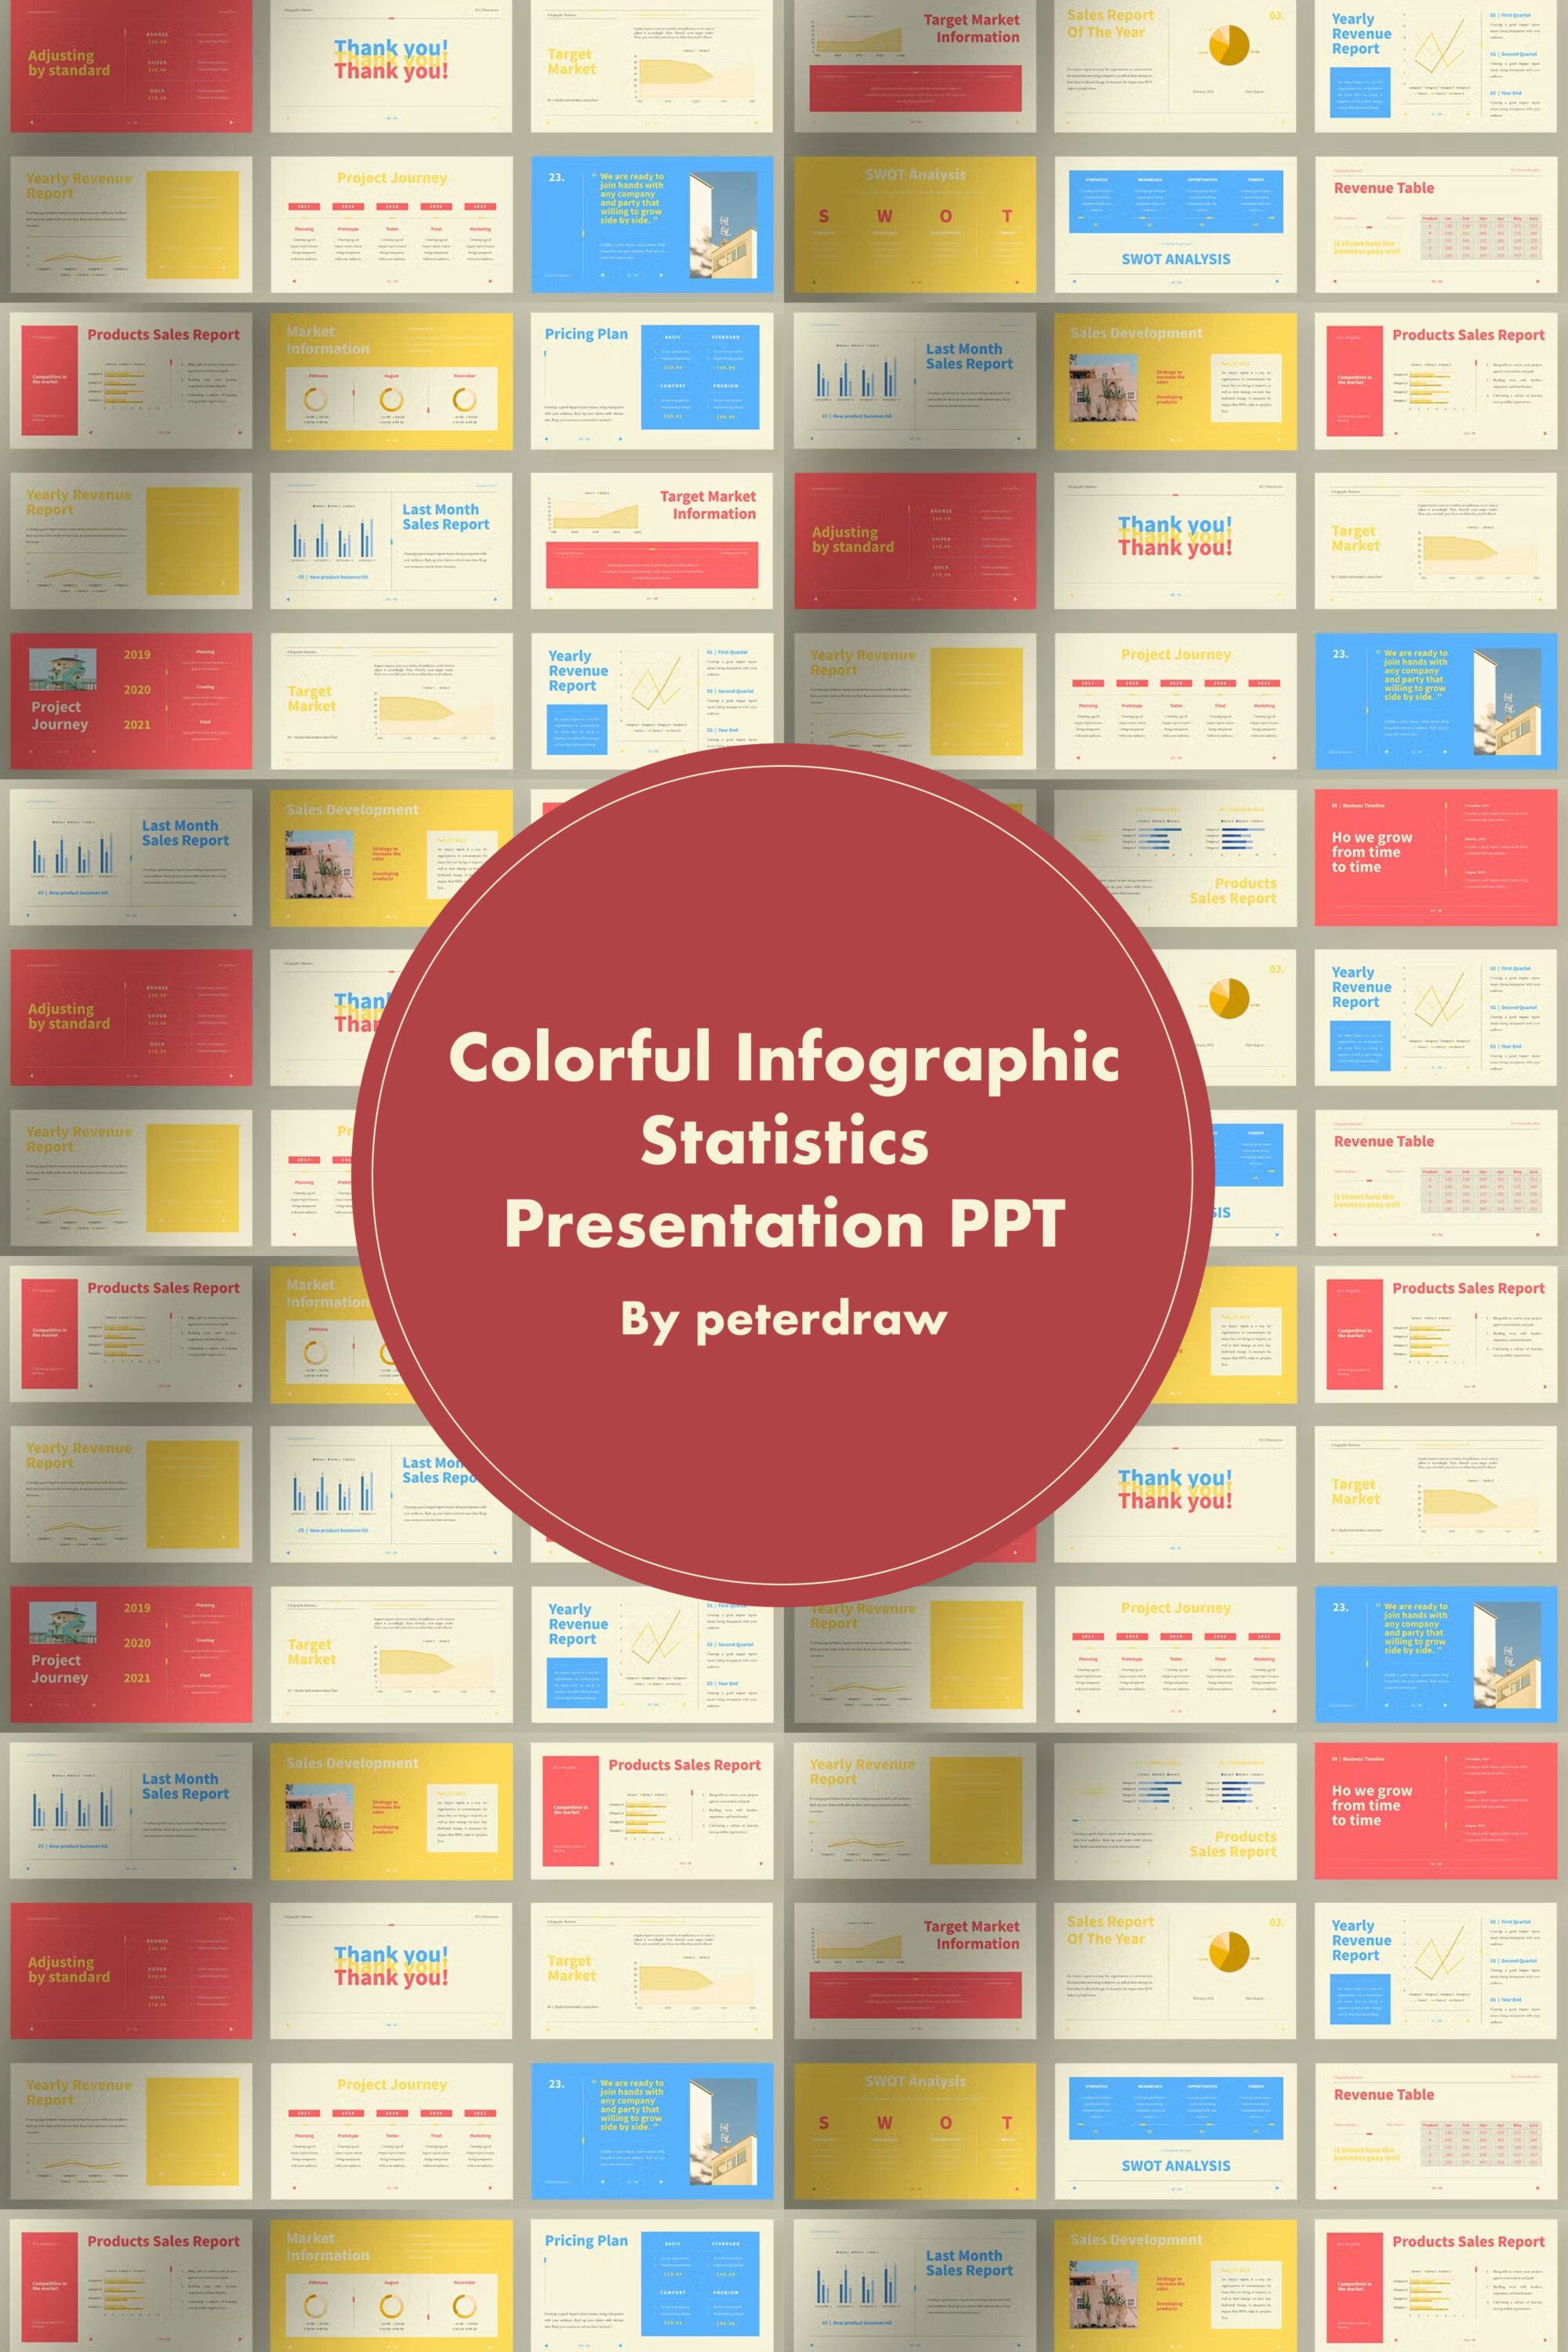 Colorful Infographic Statistics Presentation PPT - pinterest image preview.